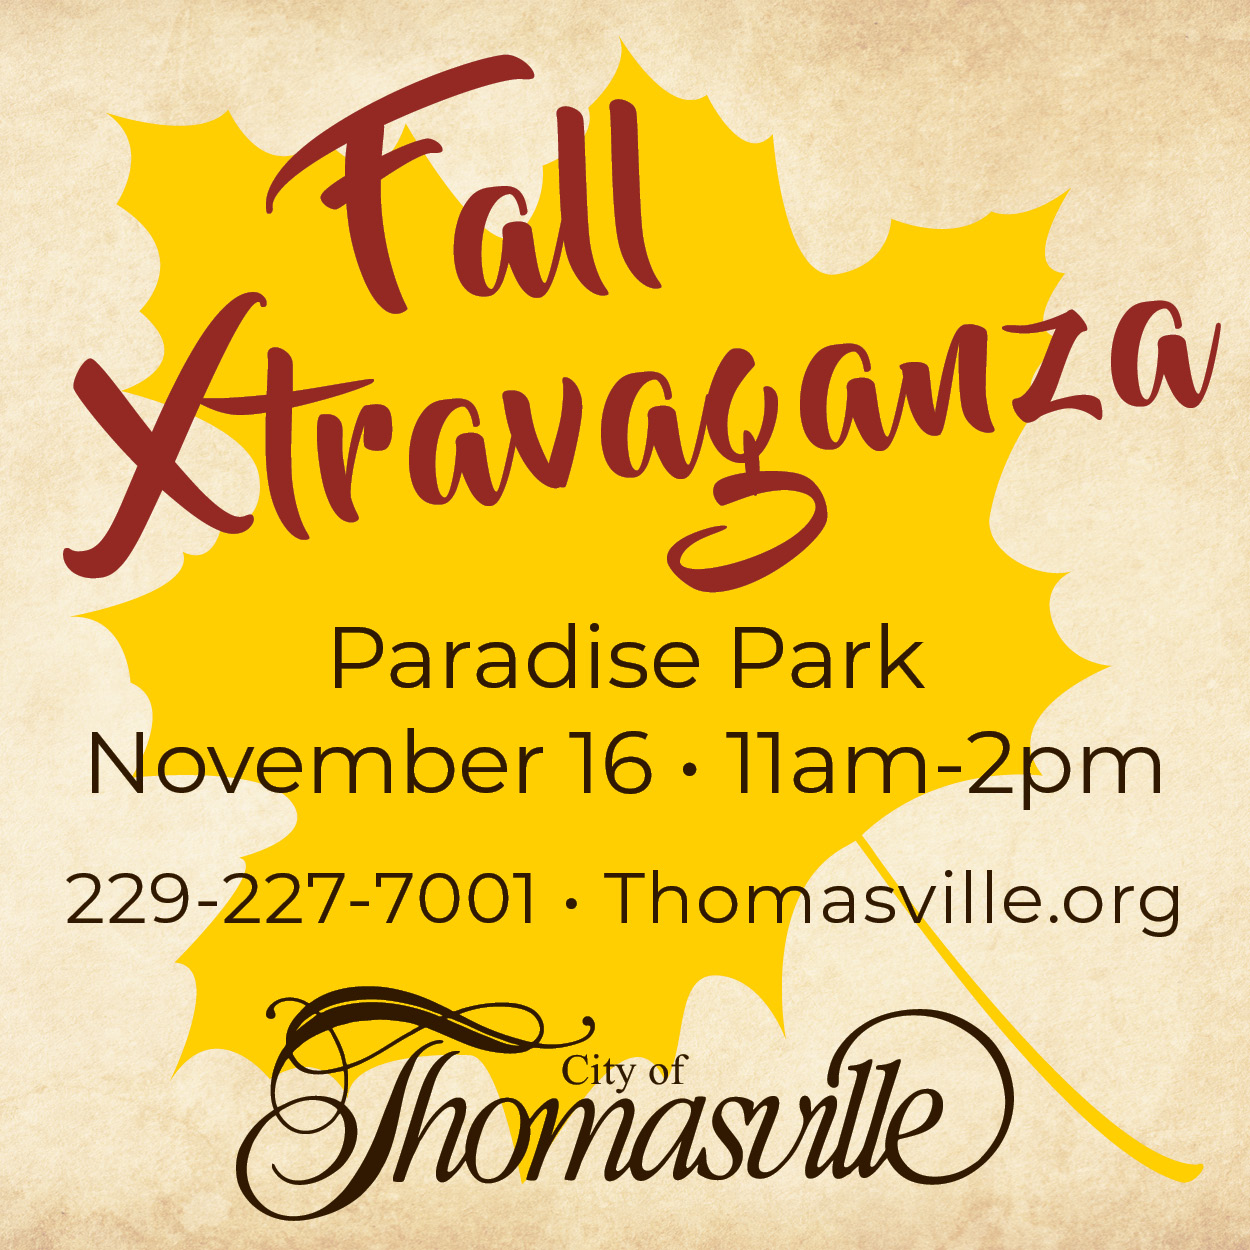 Photo for CITY OF THOMASVILLE TO HOST ANNUAL FALL XTRAVAGANZA